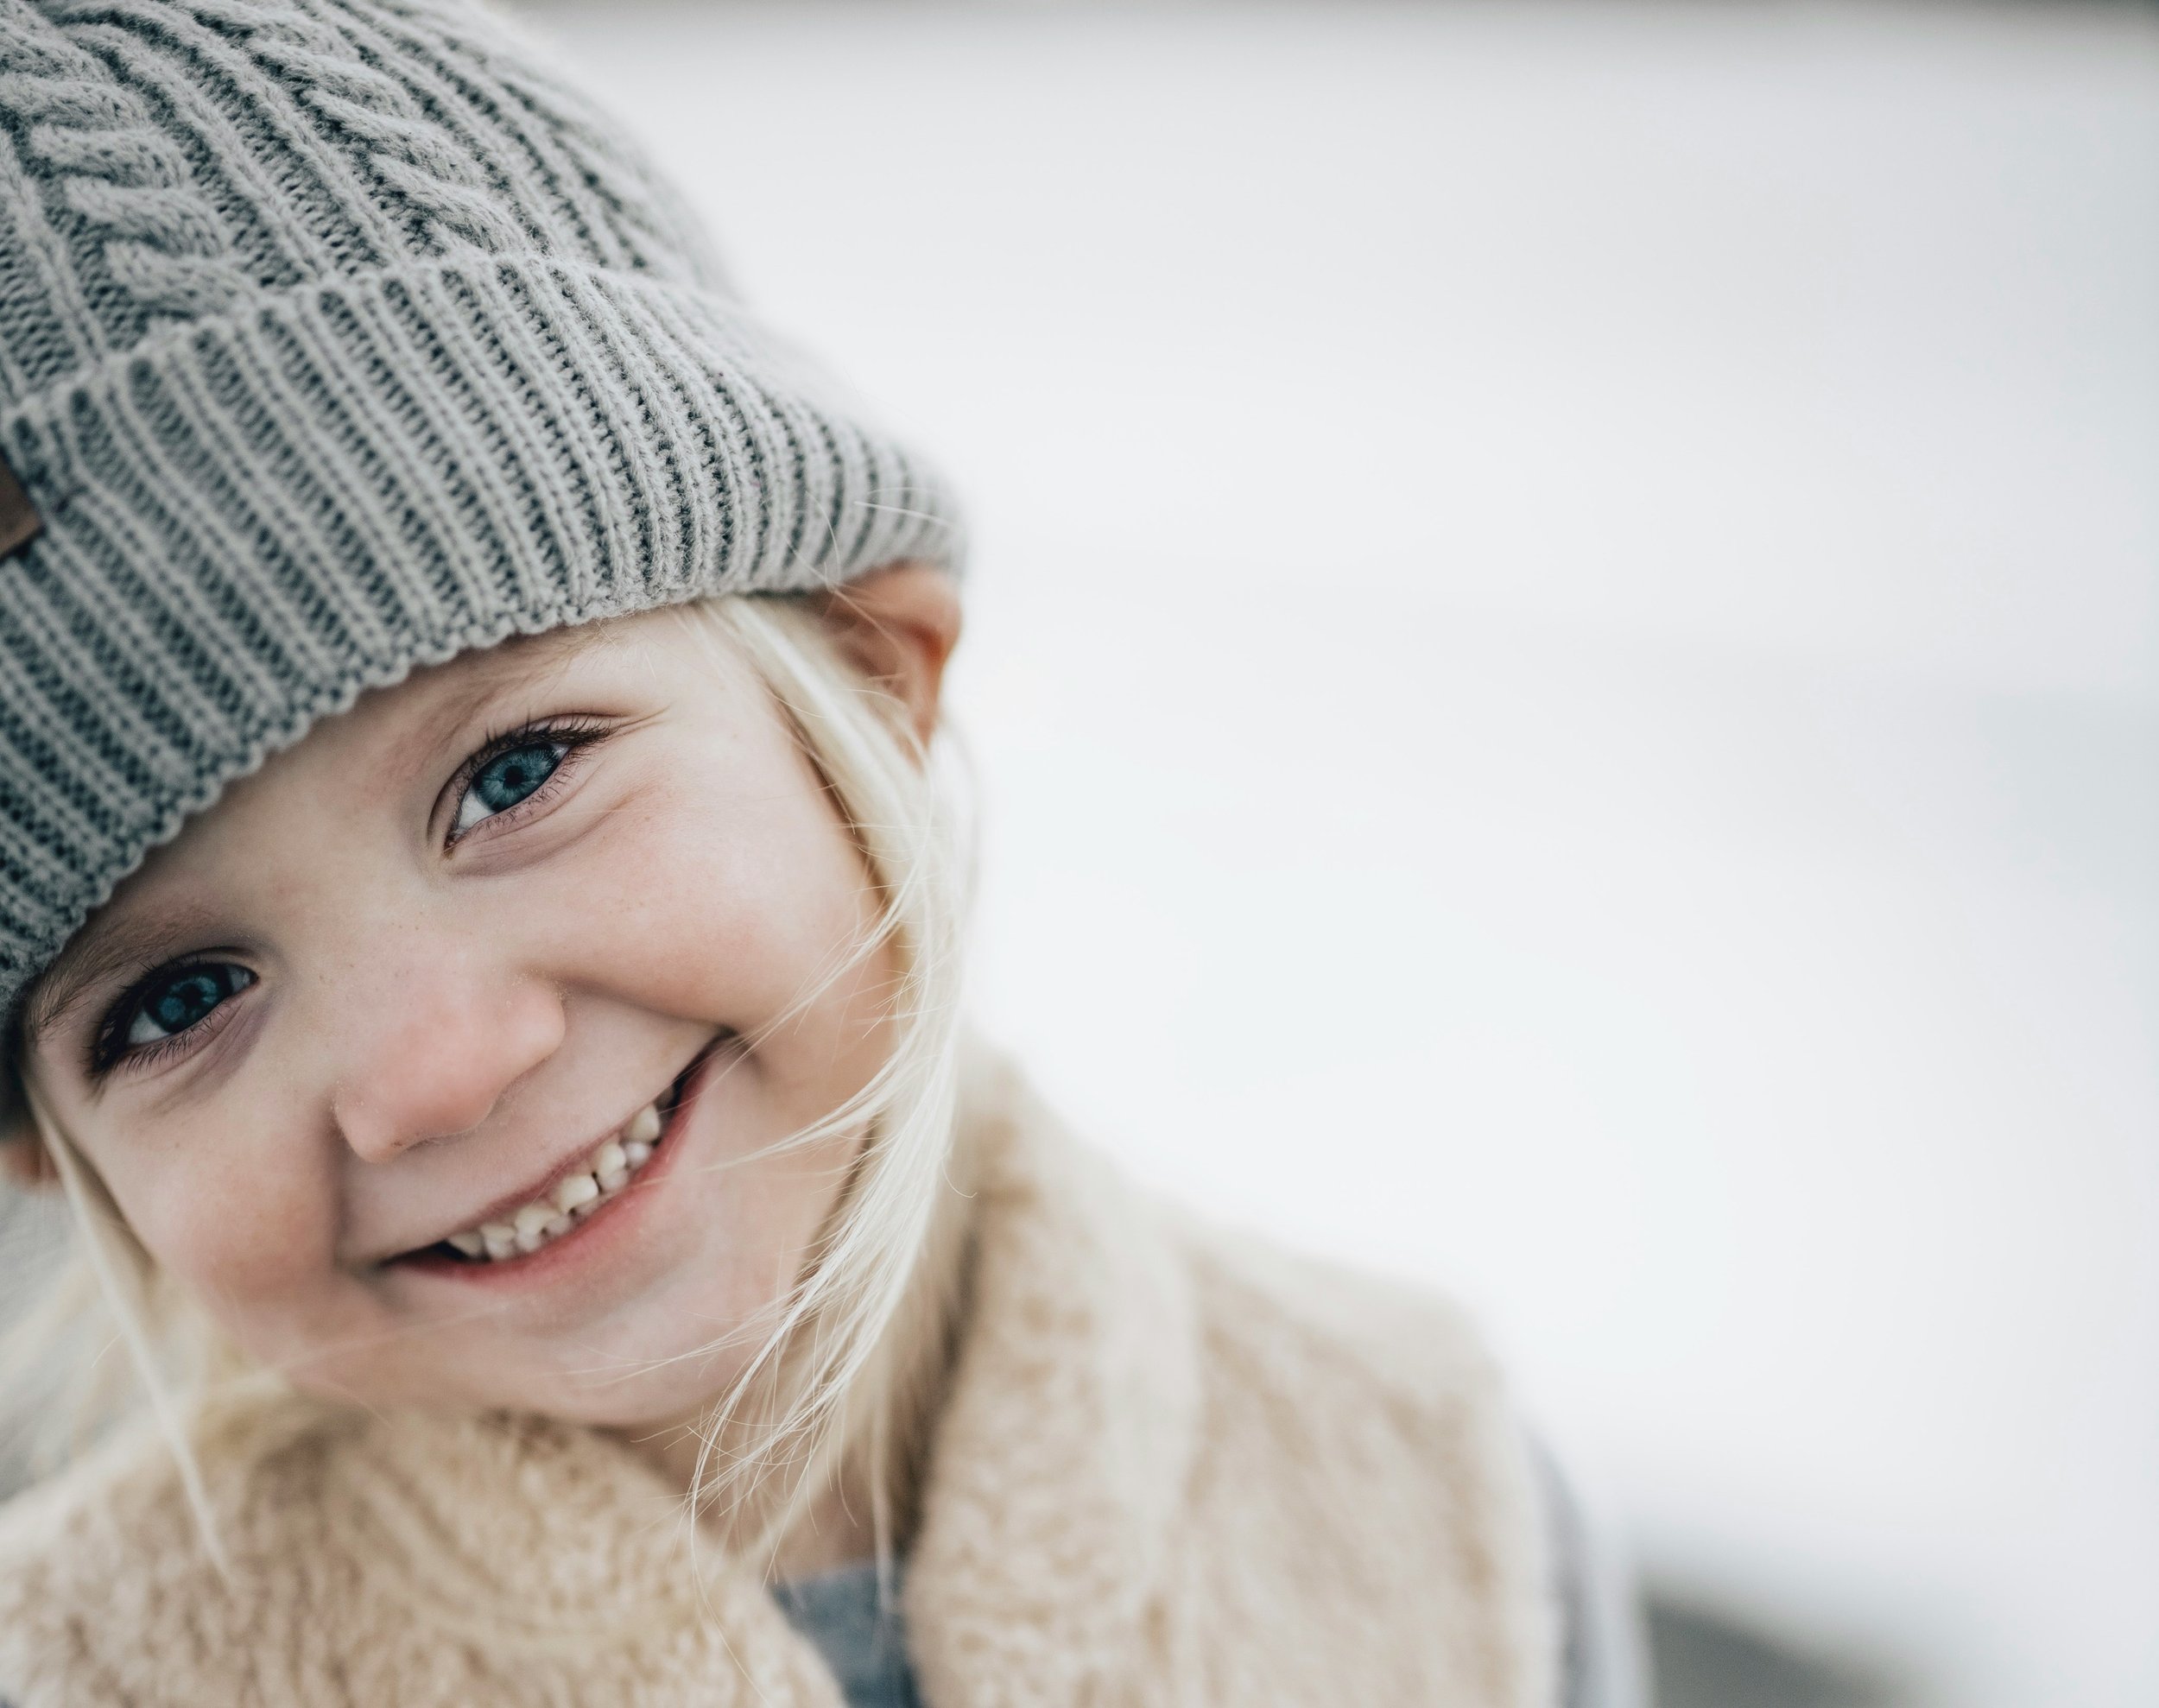 Winter Joy: Smiling Child in Warm Clothes - Garden City Family Dentistry